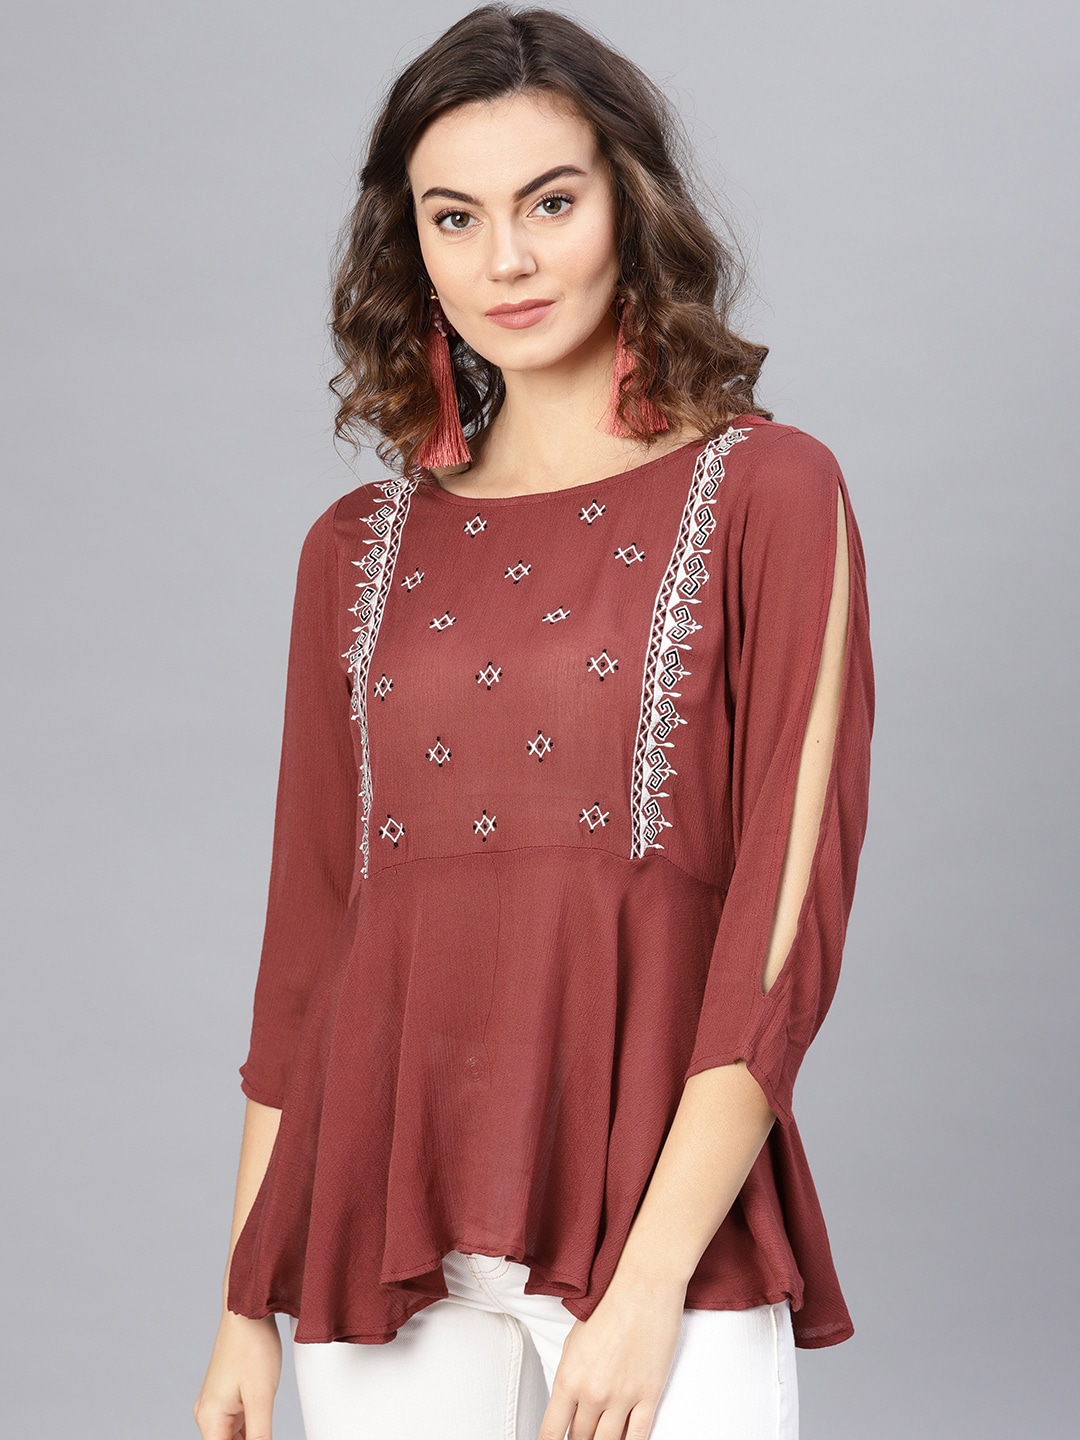 Pannkh
Women Rust Brown & Off-White Embroidered A-Line Top